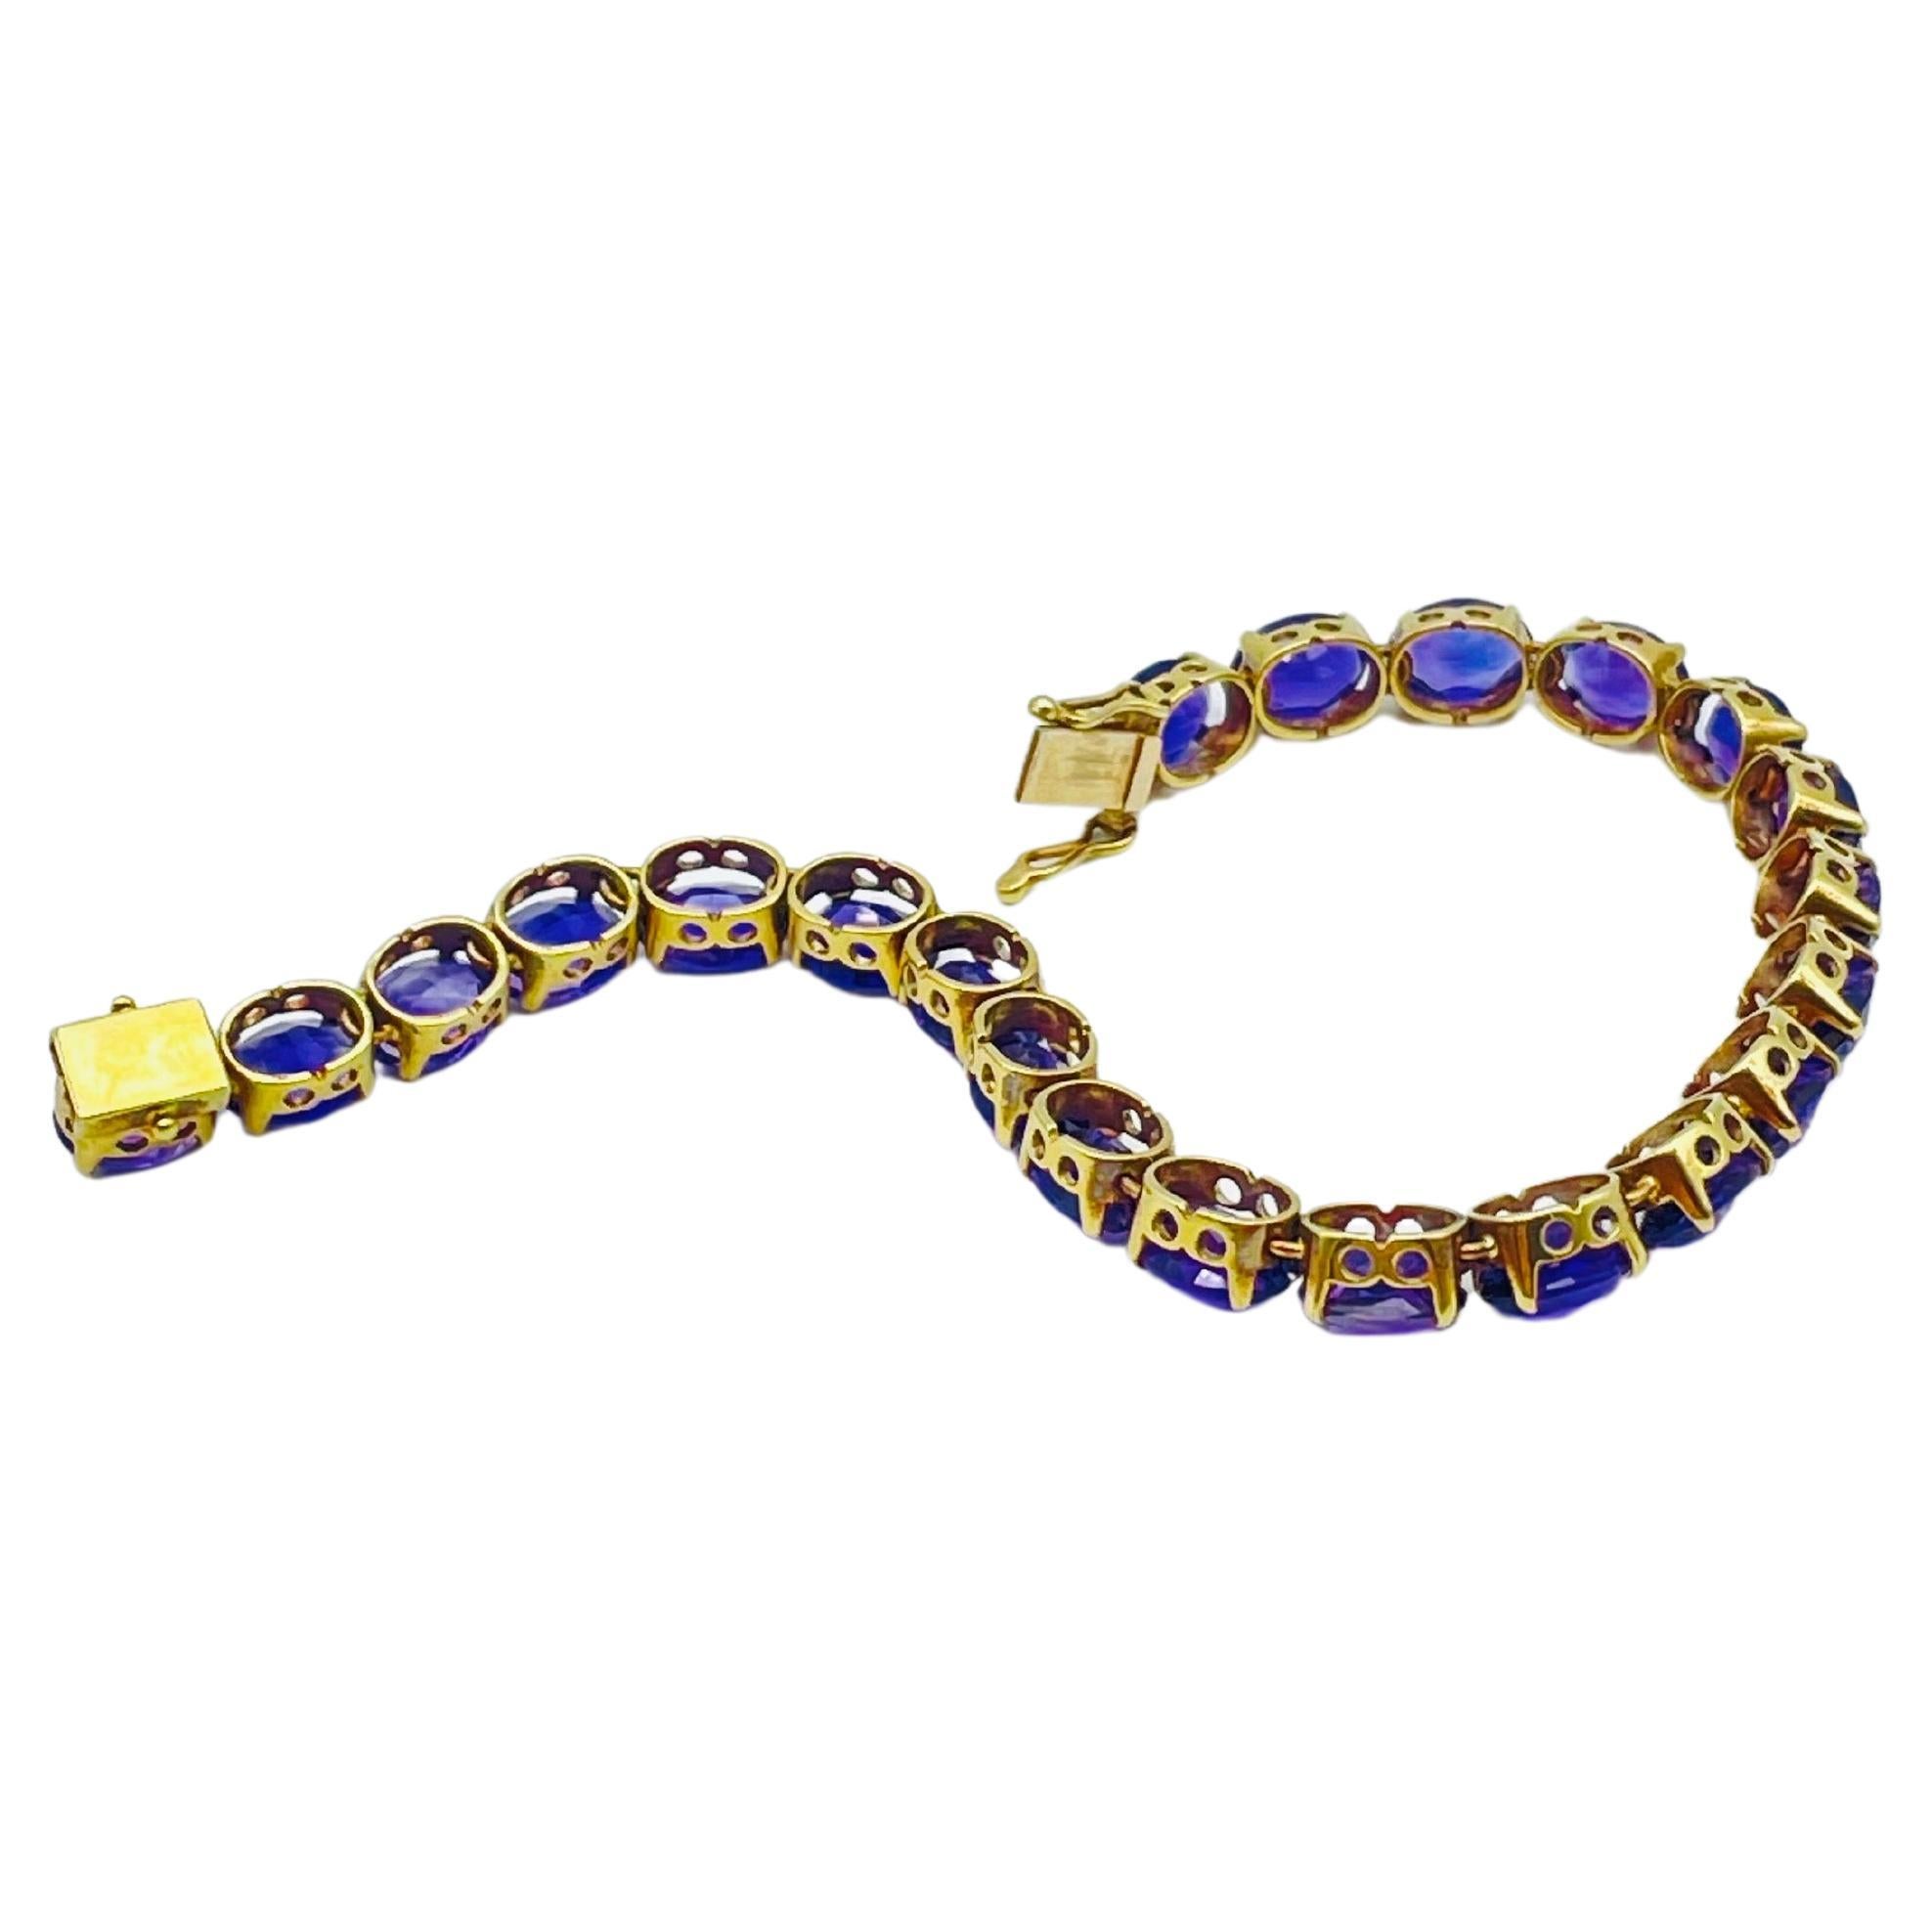 Aesthetic Movement vintage tennis braclet 14k yellow gold bracelet with amethysts For Sale